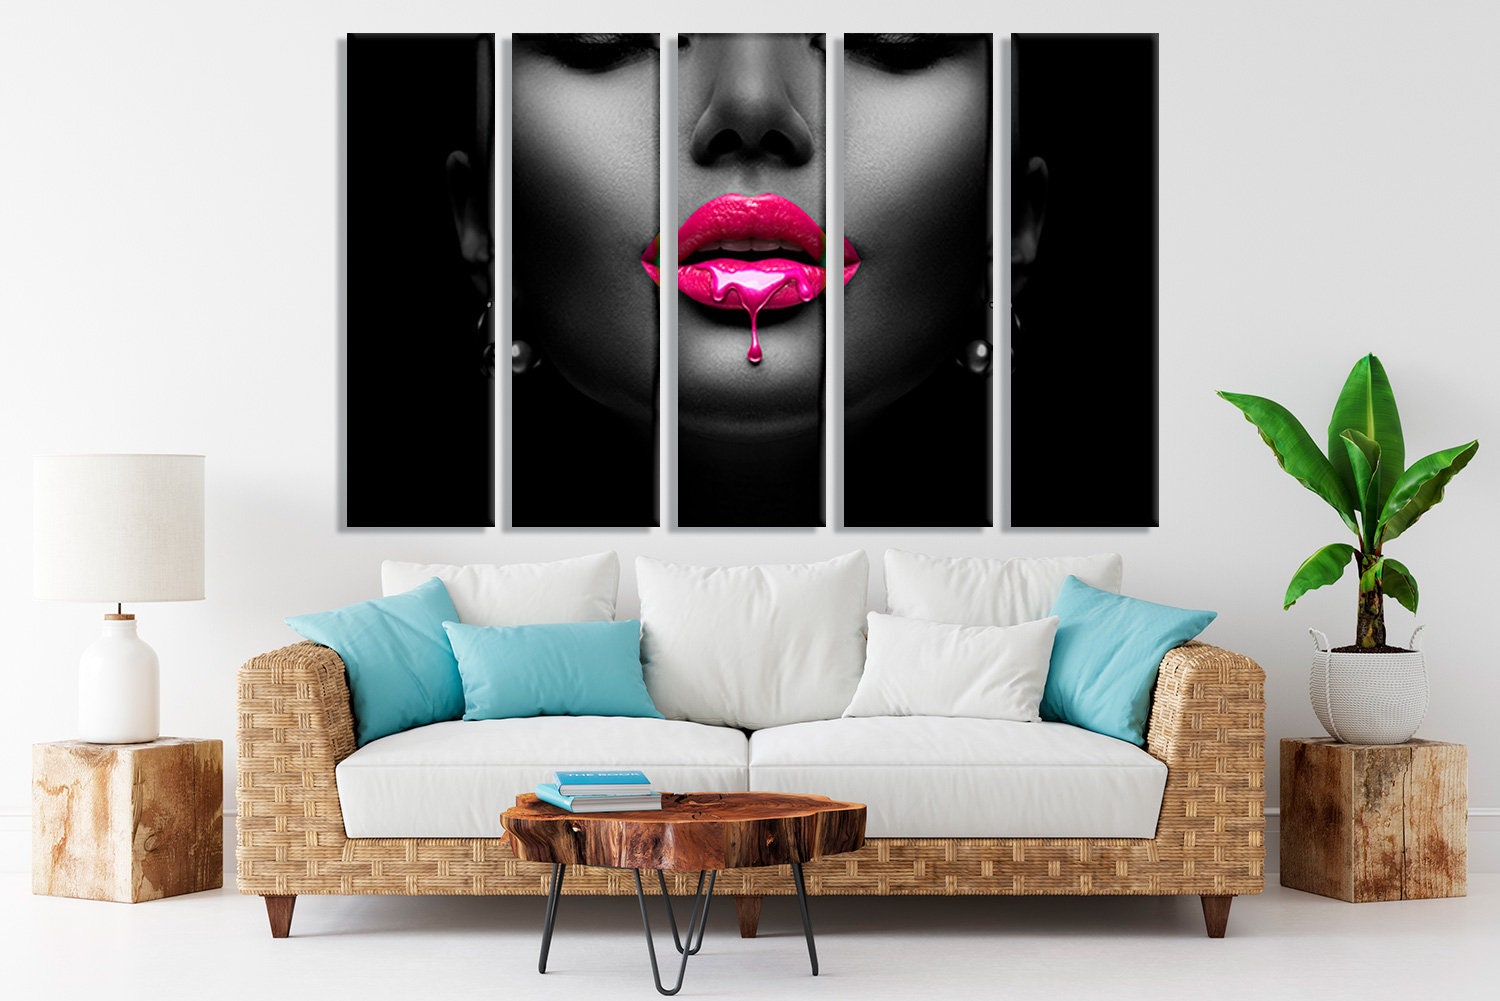 Red Lips Poster Red Lips Canvas Fashion Wall Art Fashion - Etsy